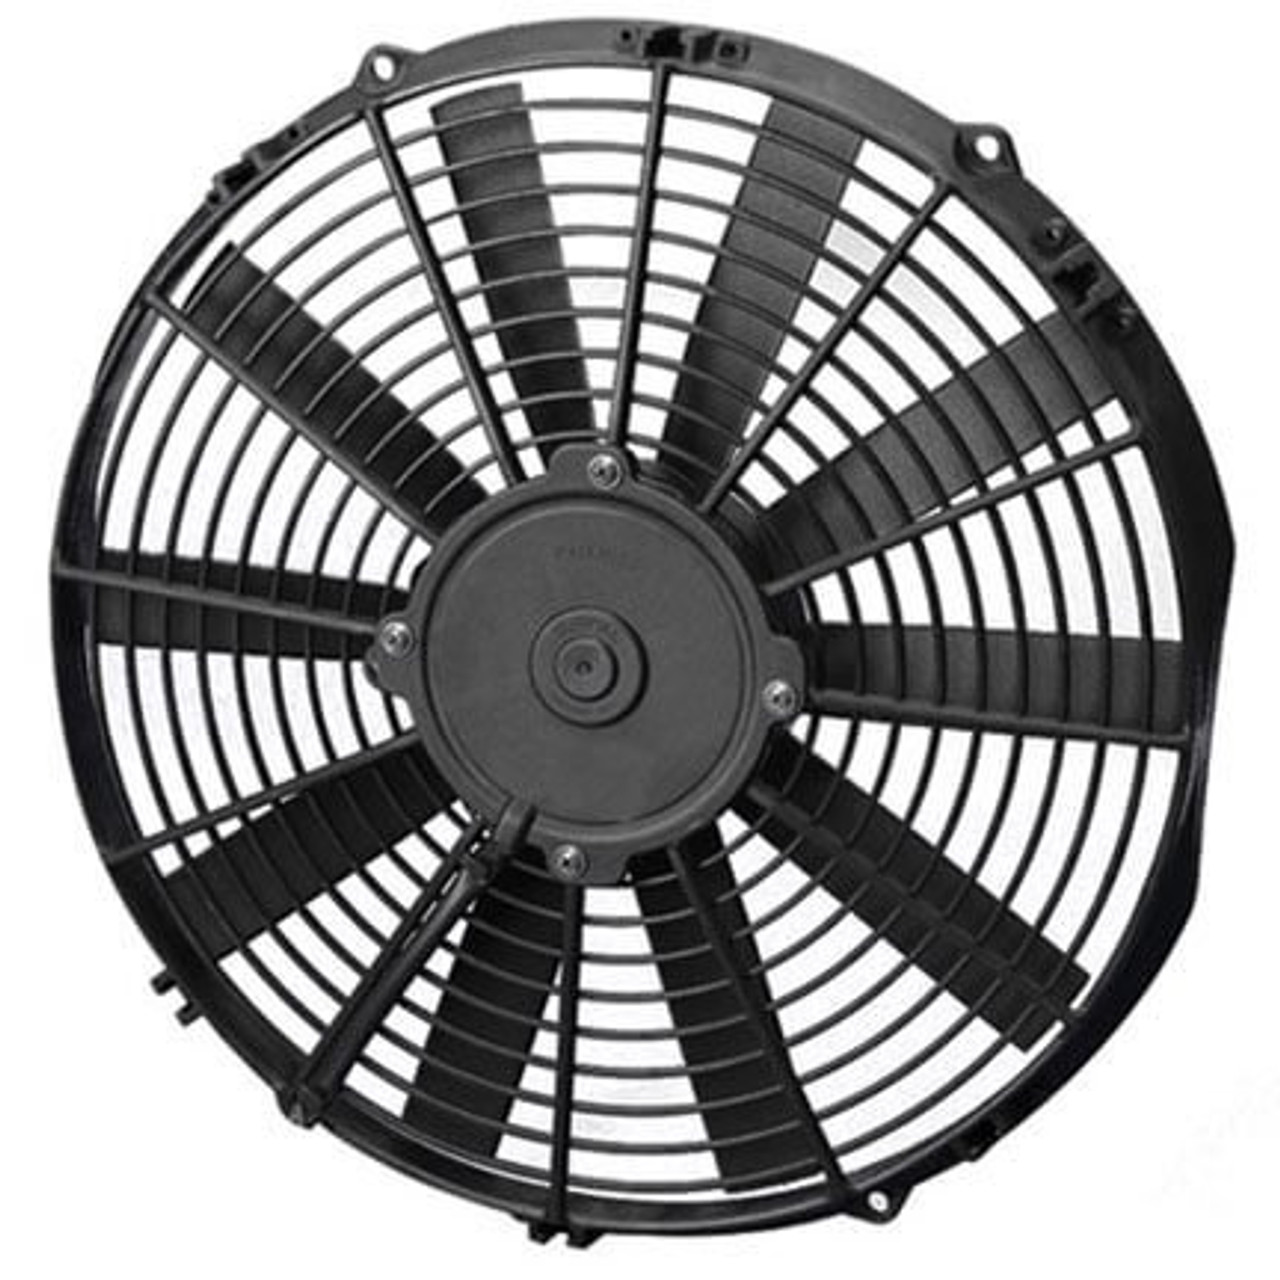 30100399 SPAL® 13" Electric Fan Pusher Low Profile 1032 CFM 10 Straight blades